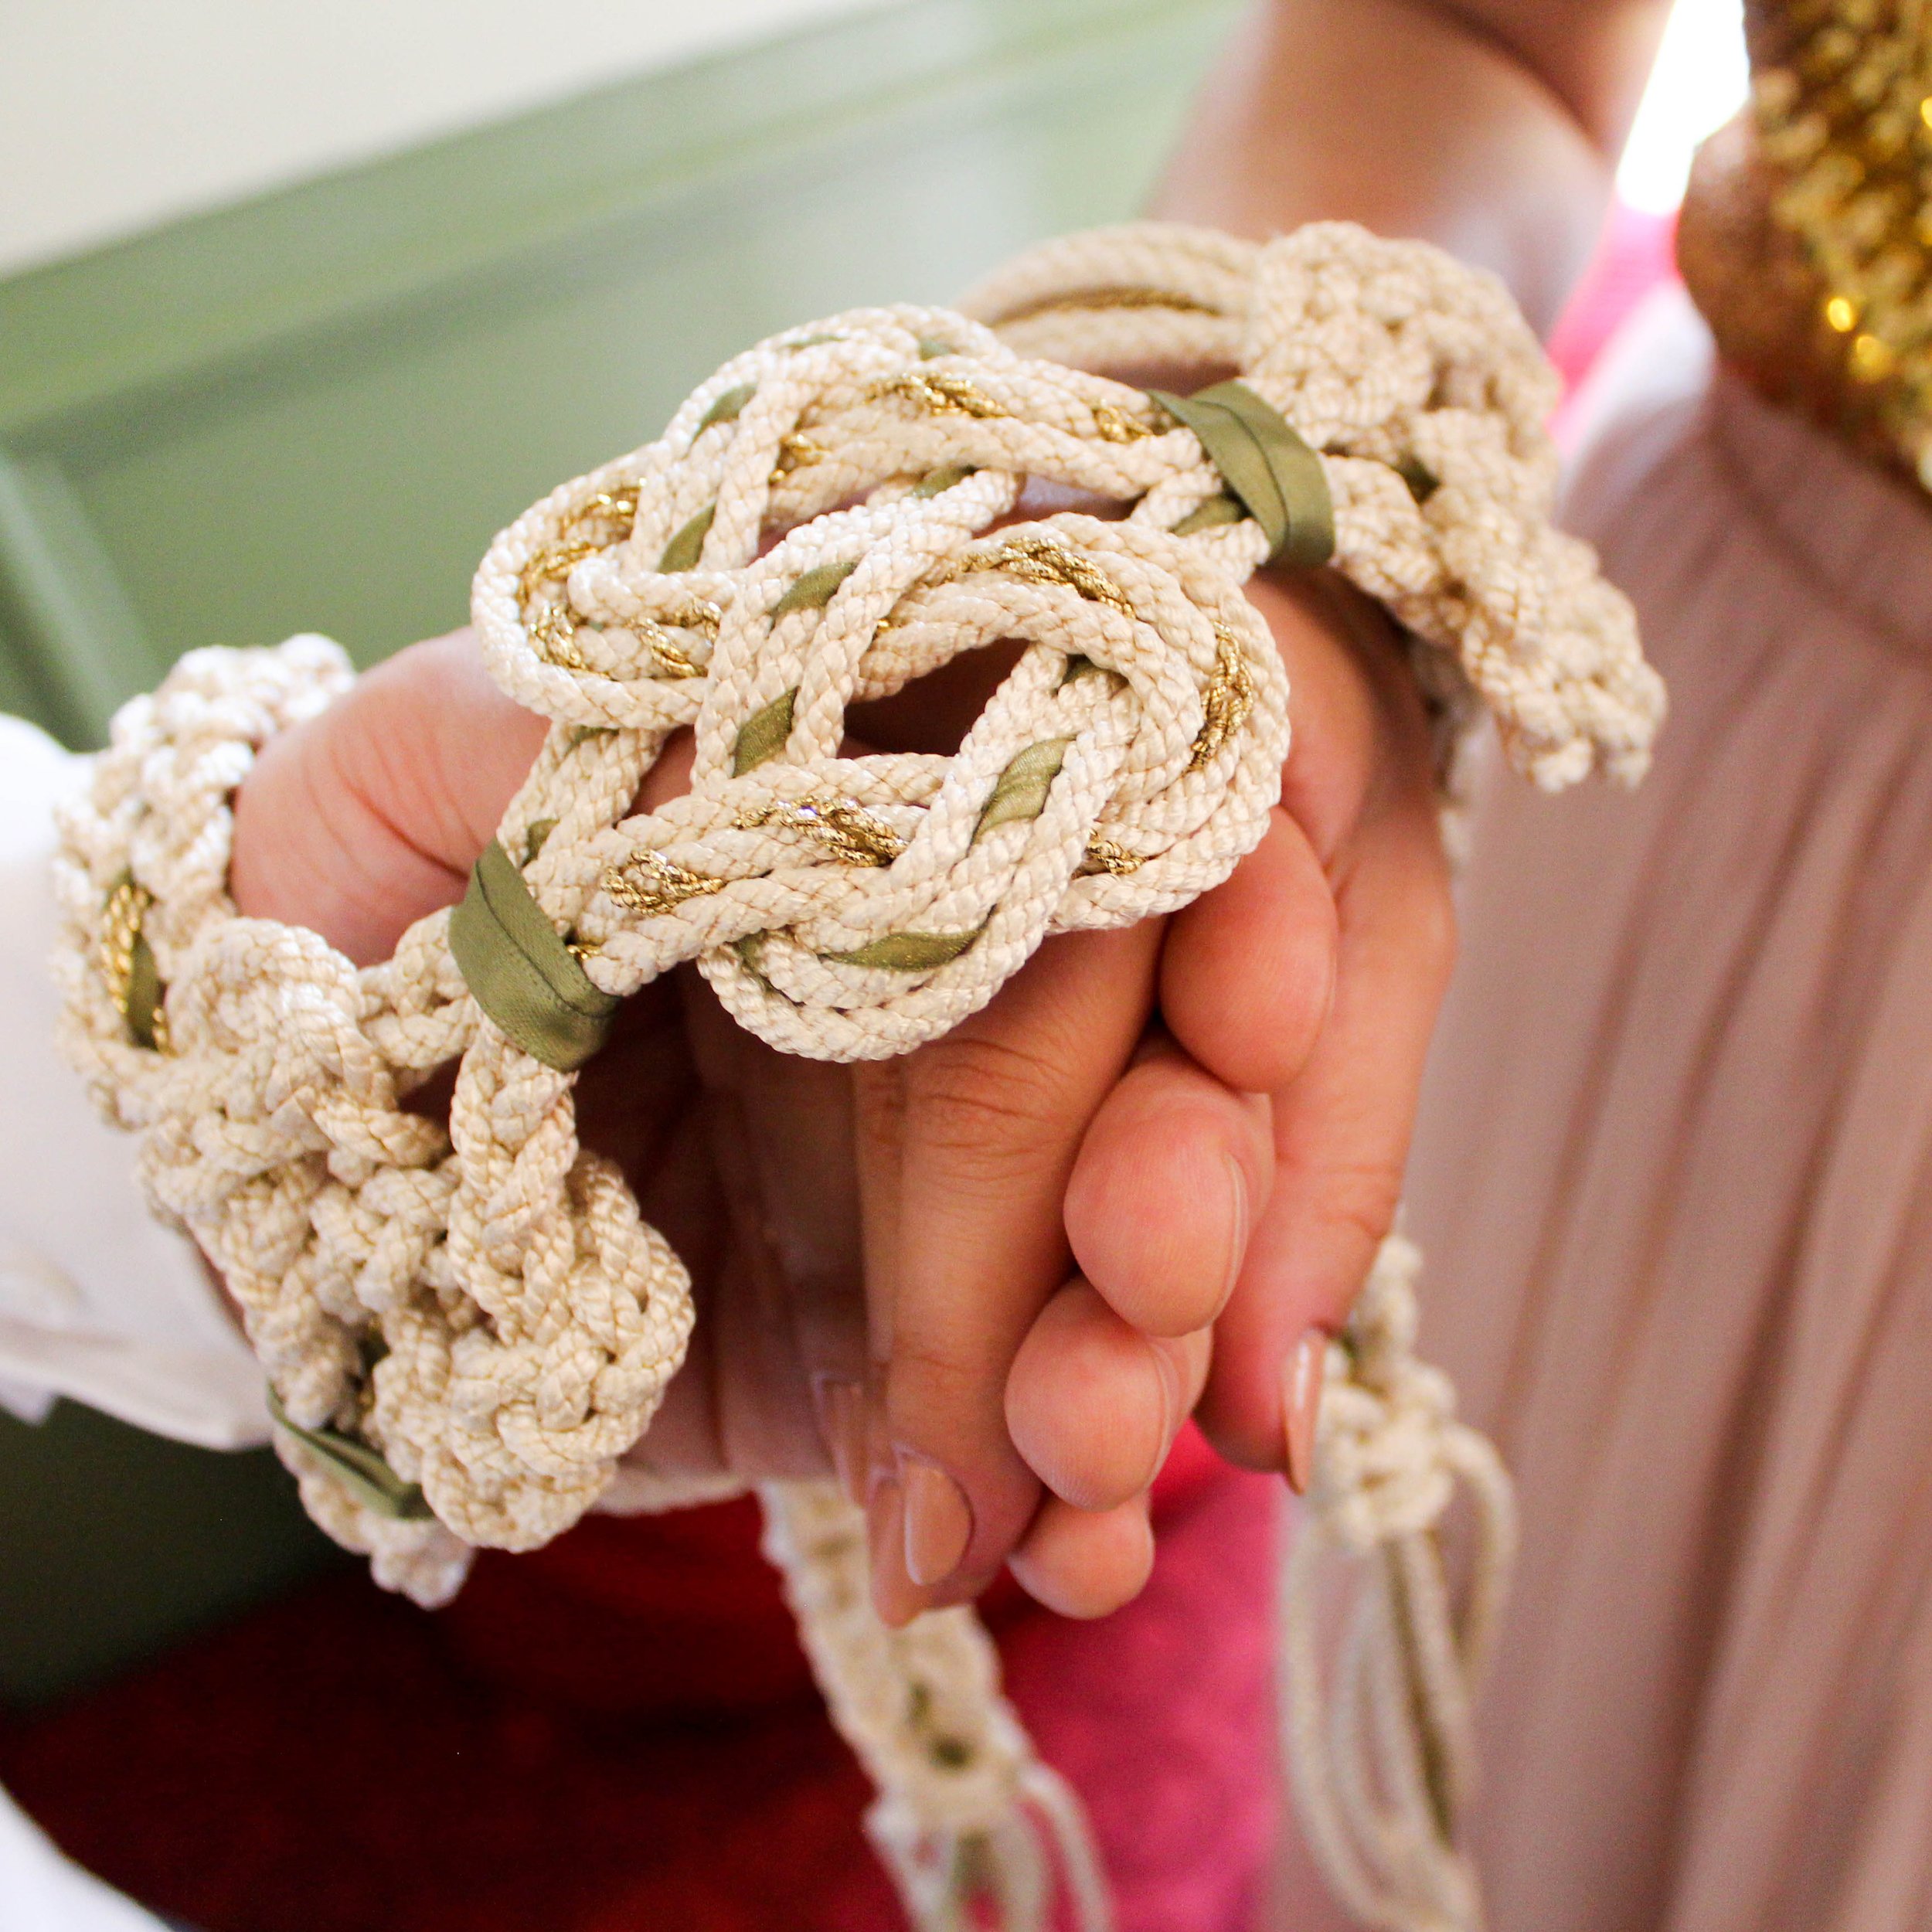 Meaning and symbolism of flowers in handfasting cords — Ceotha - handfasting  Cords